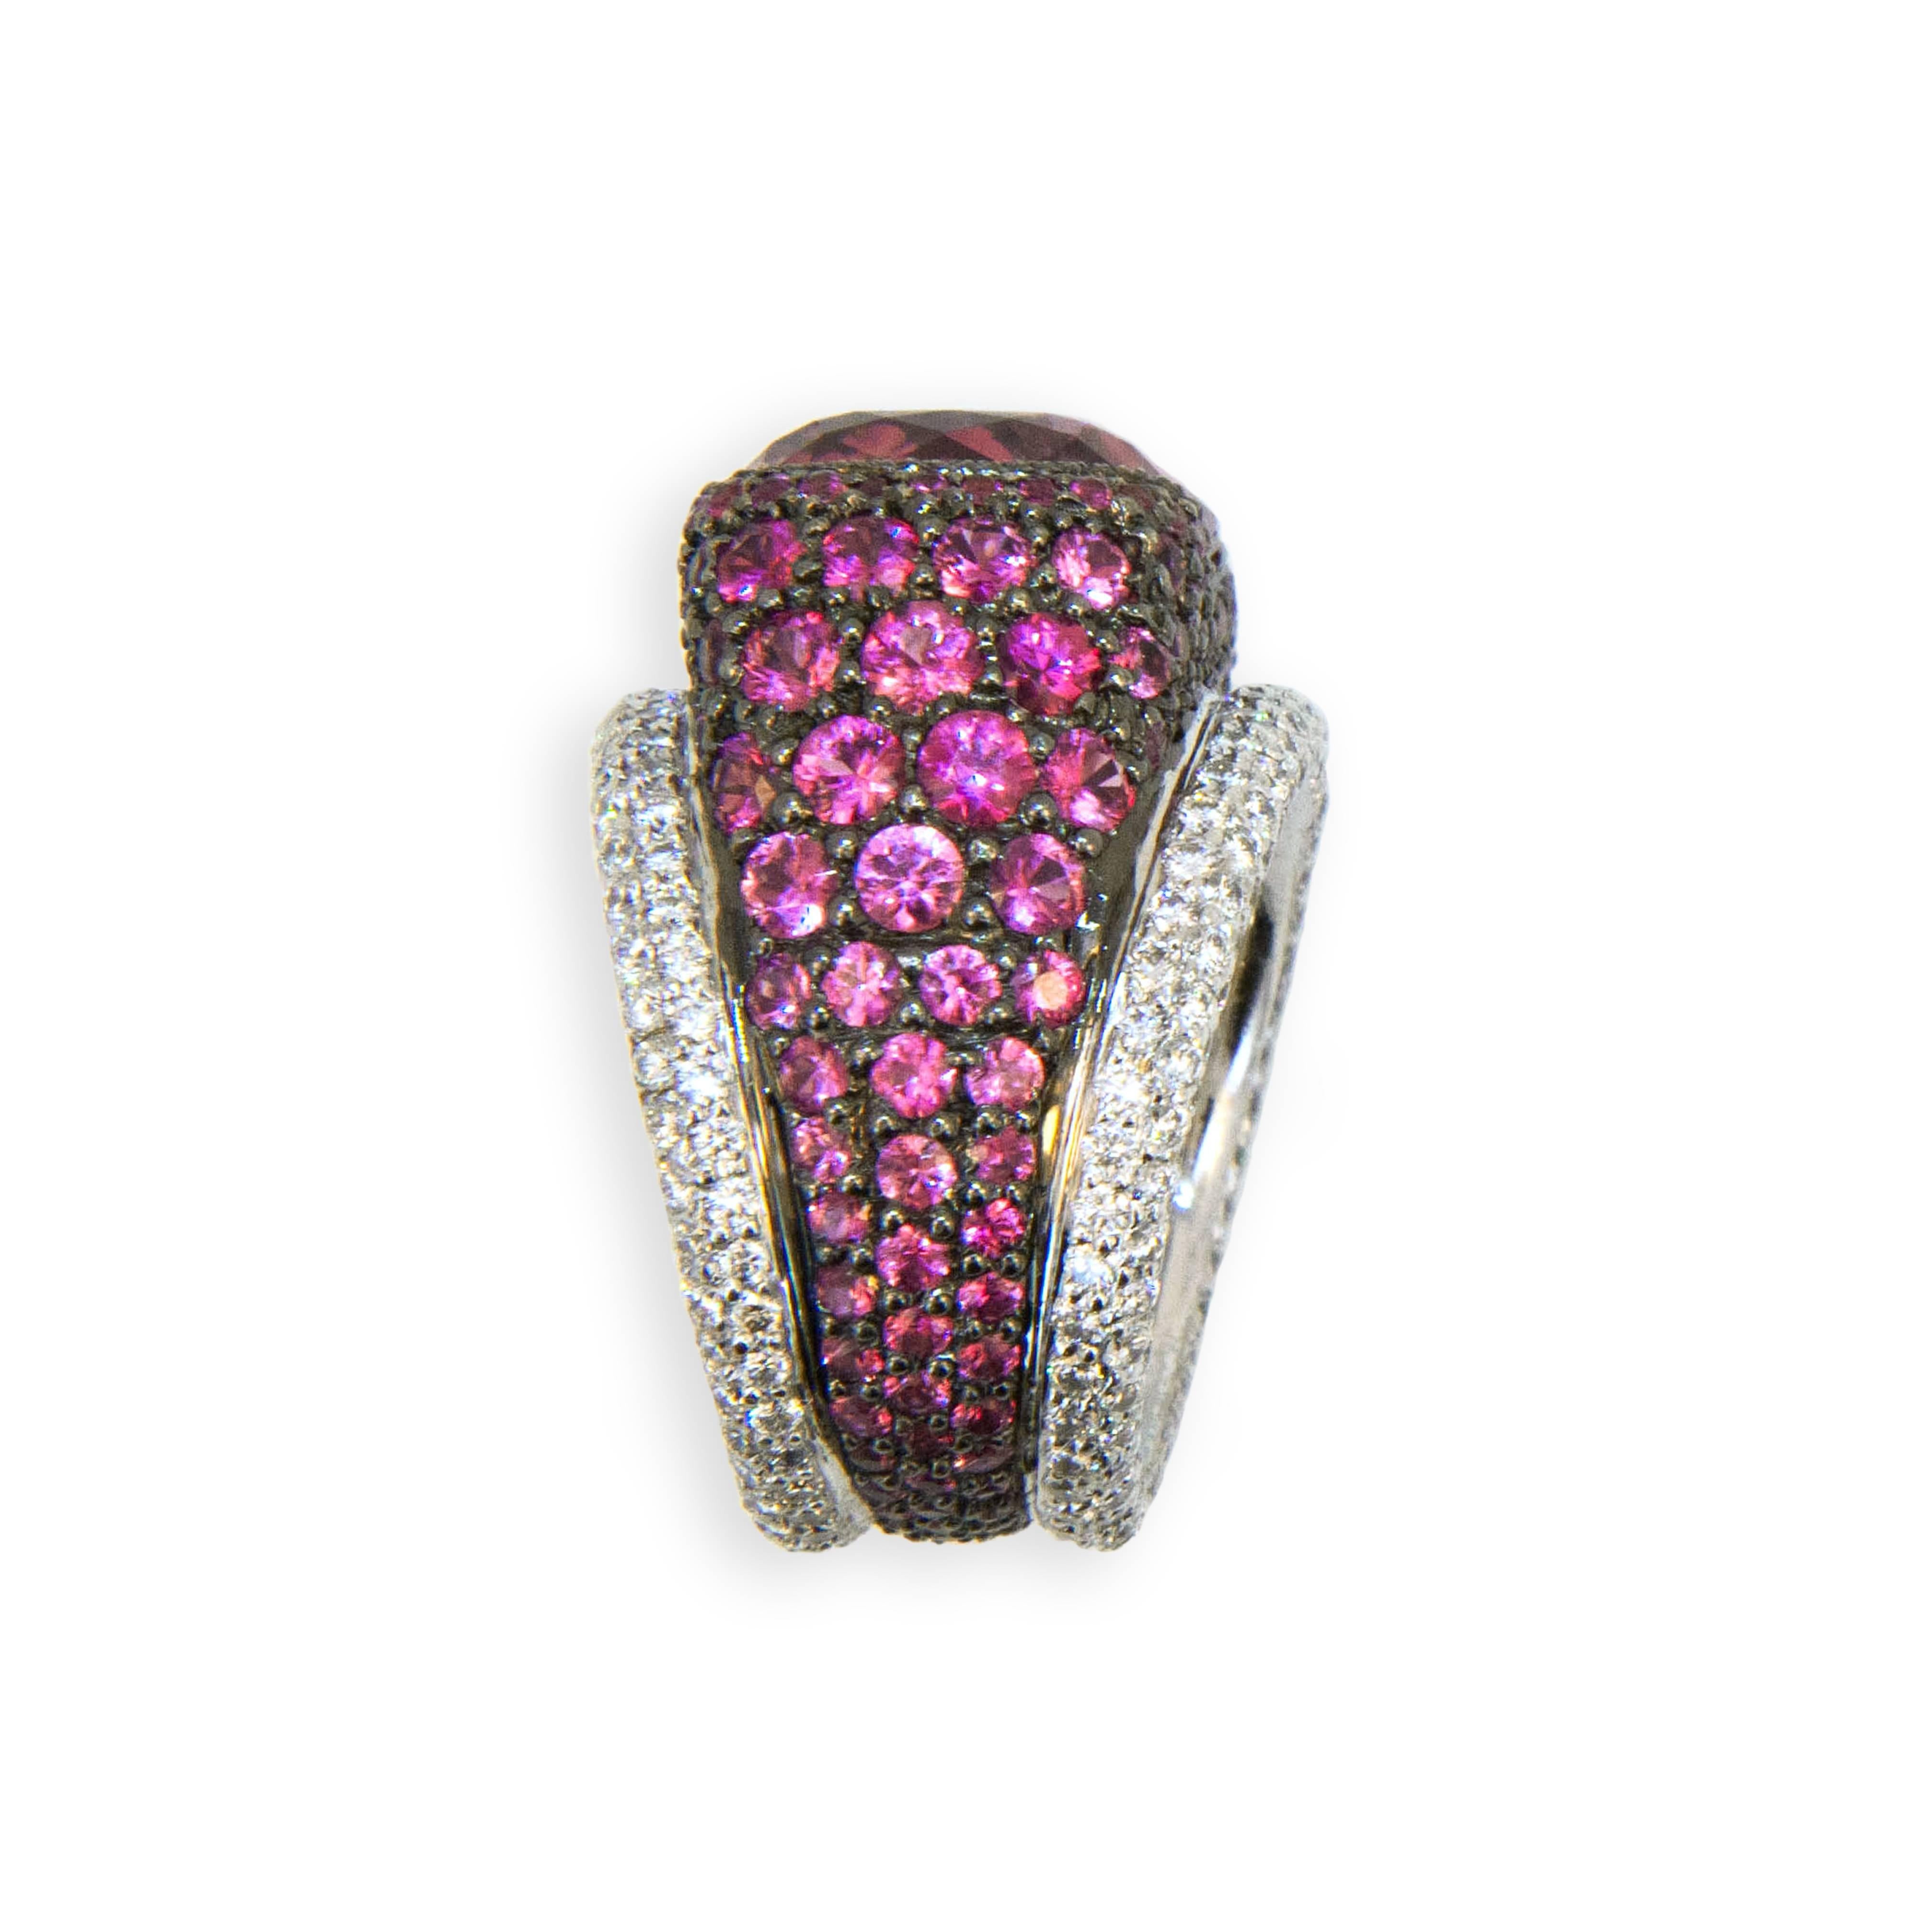 18 karat blackened white gold ring set with a cushion cut Pink tourmaline 12.65 carats total weight 14.68 x 13.72 x 9.36 mm, Surrounded by graduated cut and colored Pink Sapphires 5.86 carats total weight with two rows of diamonds 2.83 carats total